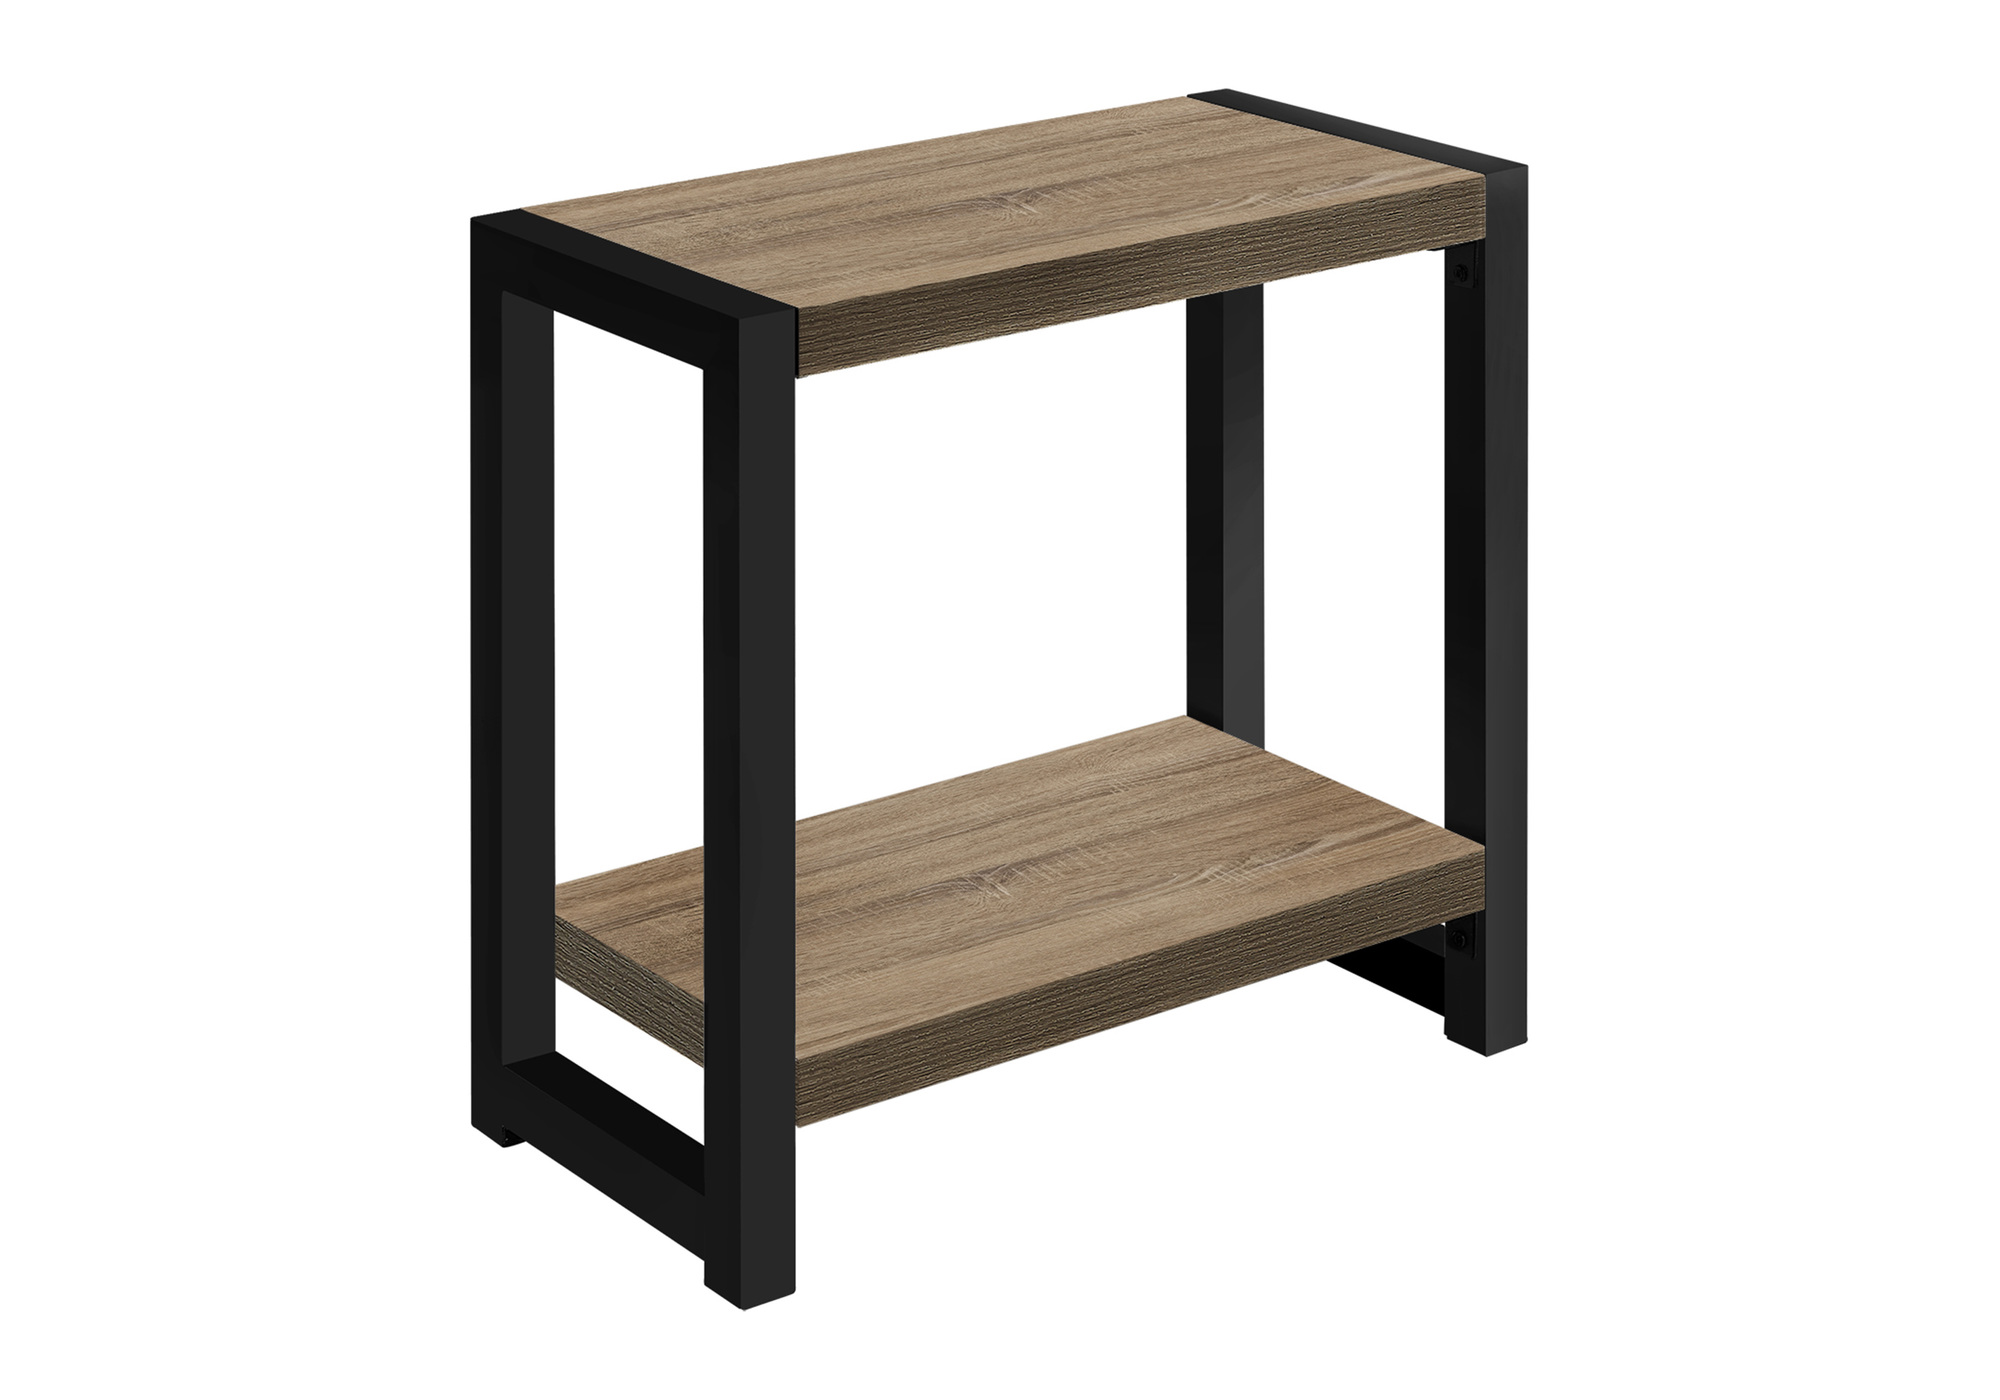 ACCENT TABLE - 22"H / DARK TAUPE / BLACK METAL